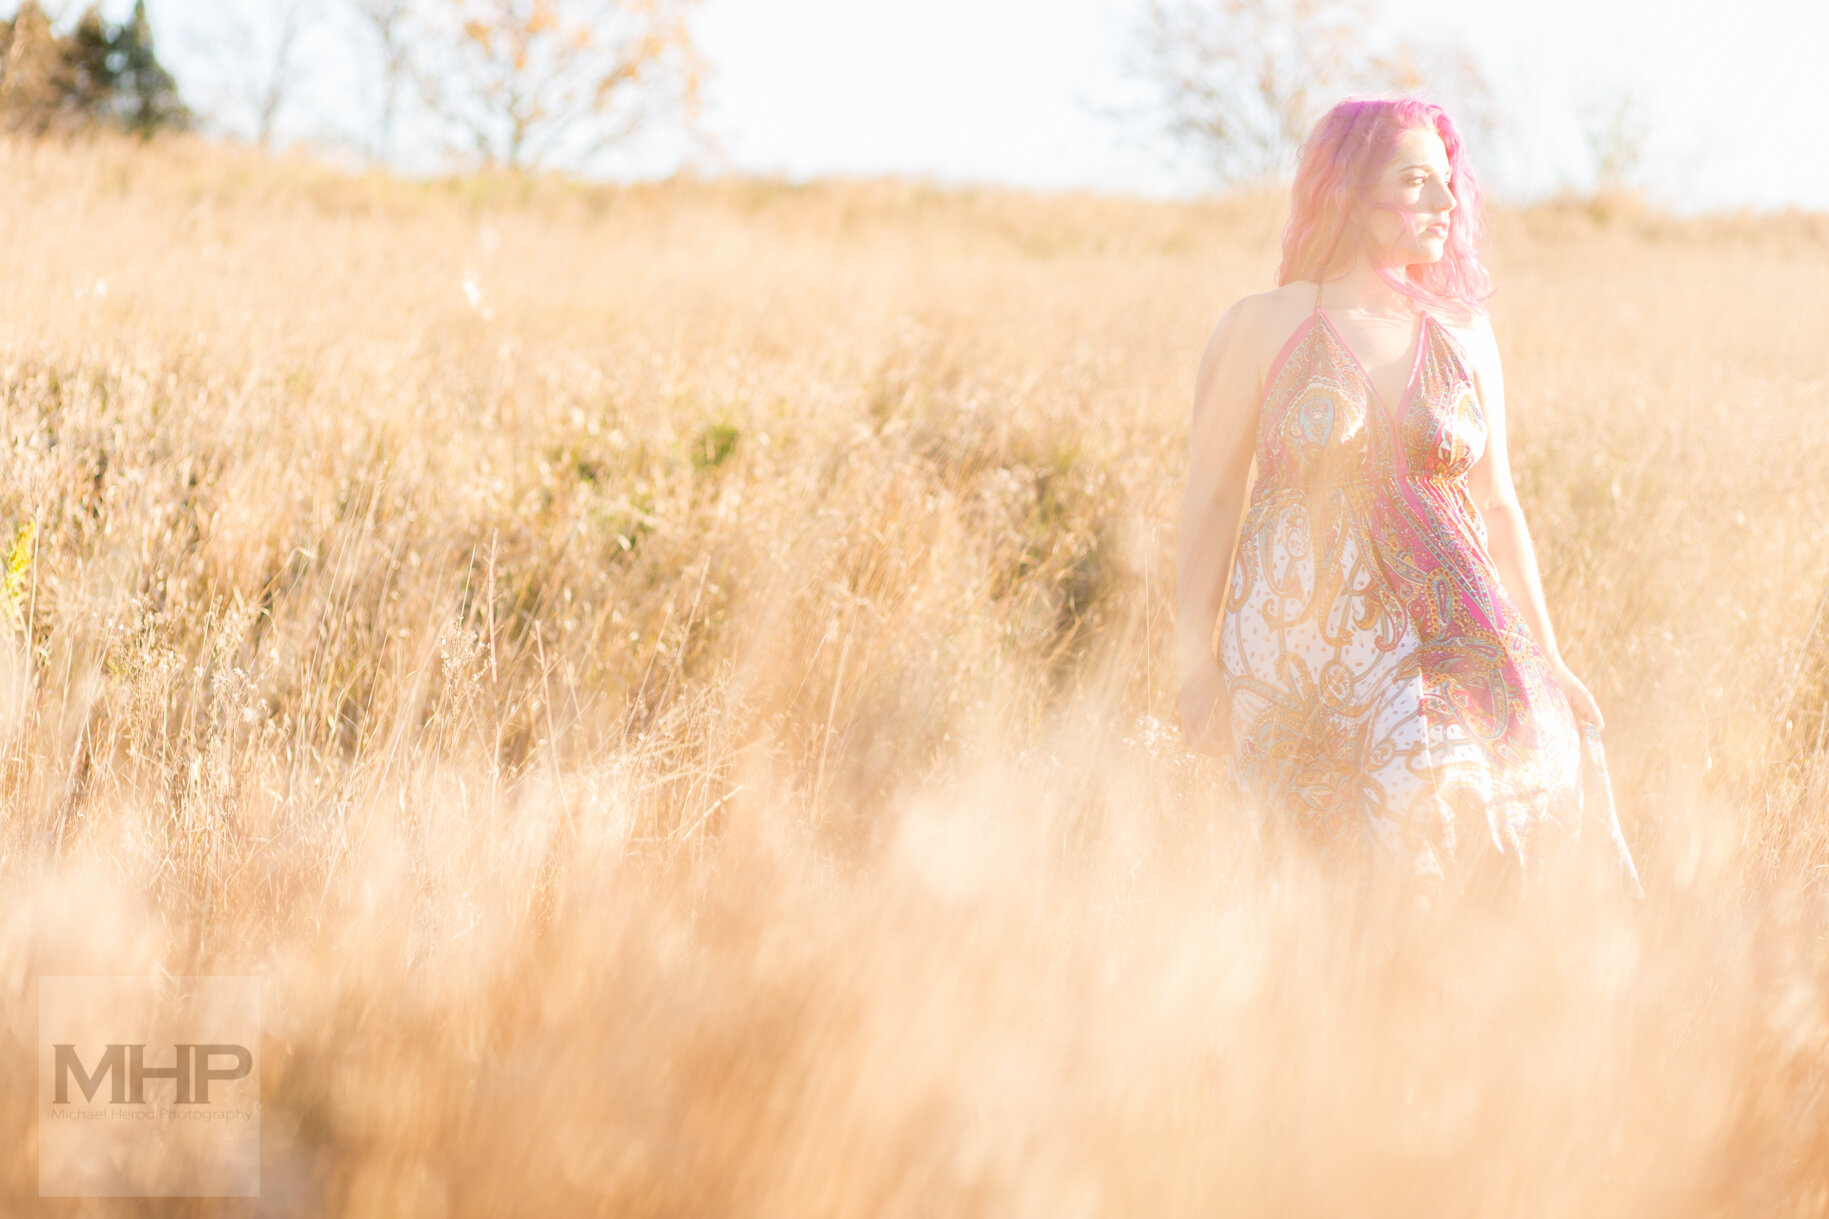 Portrait of a young lady with pink hair walking through a sunny field